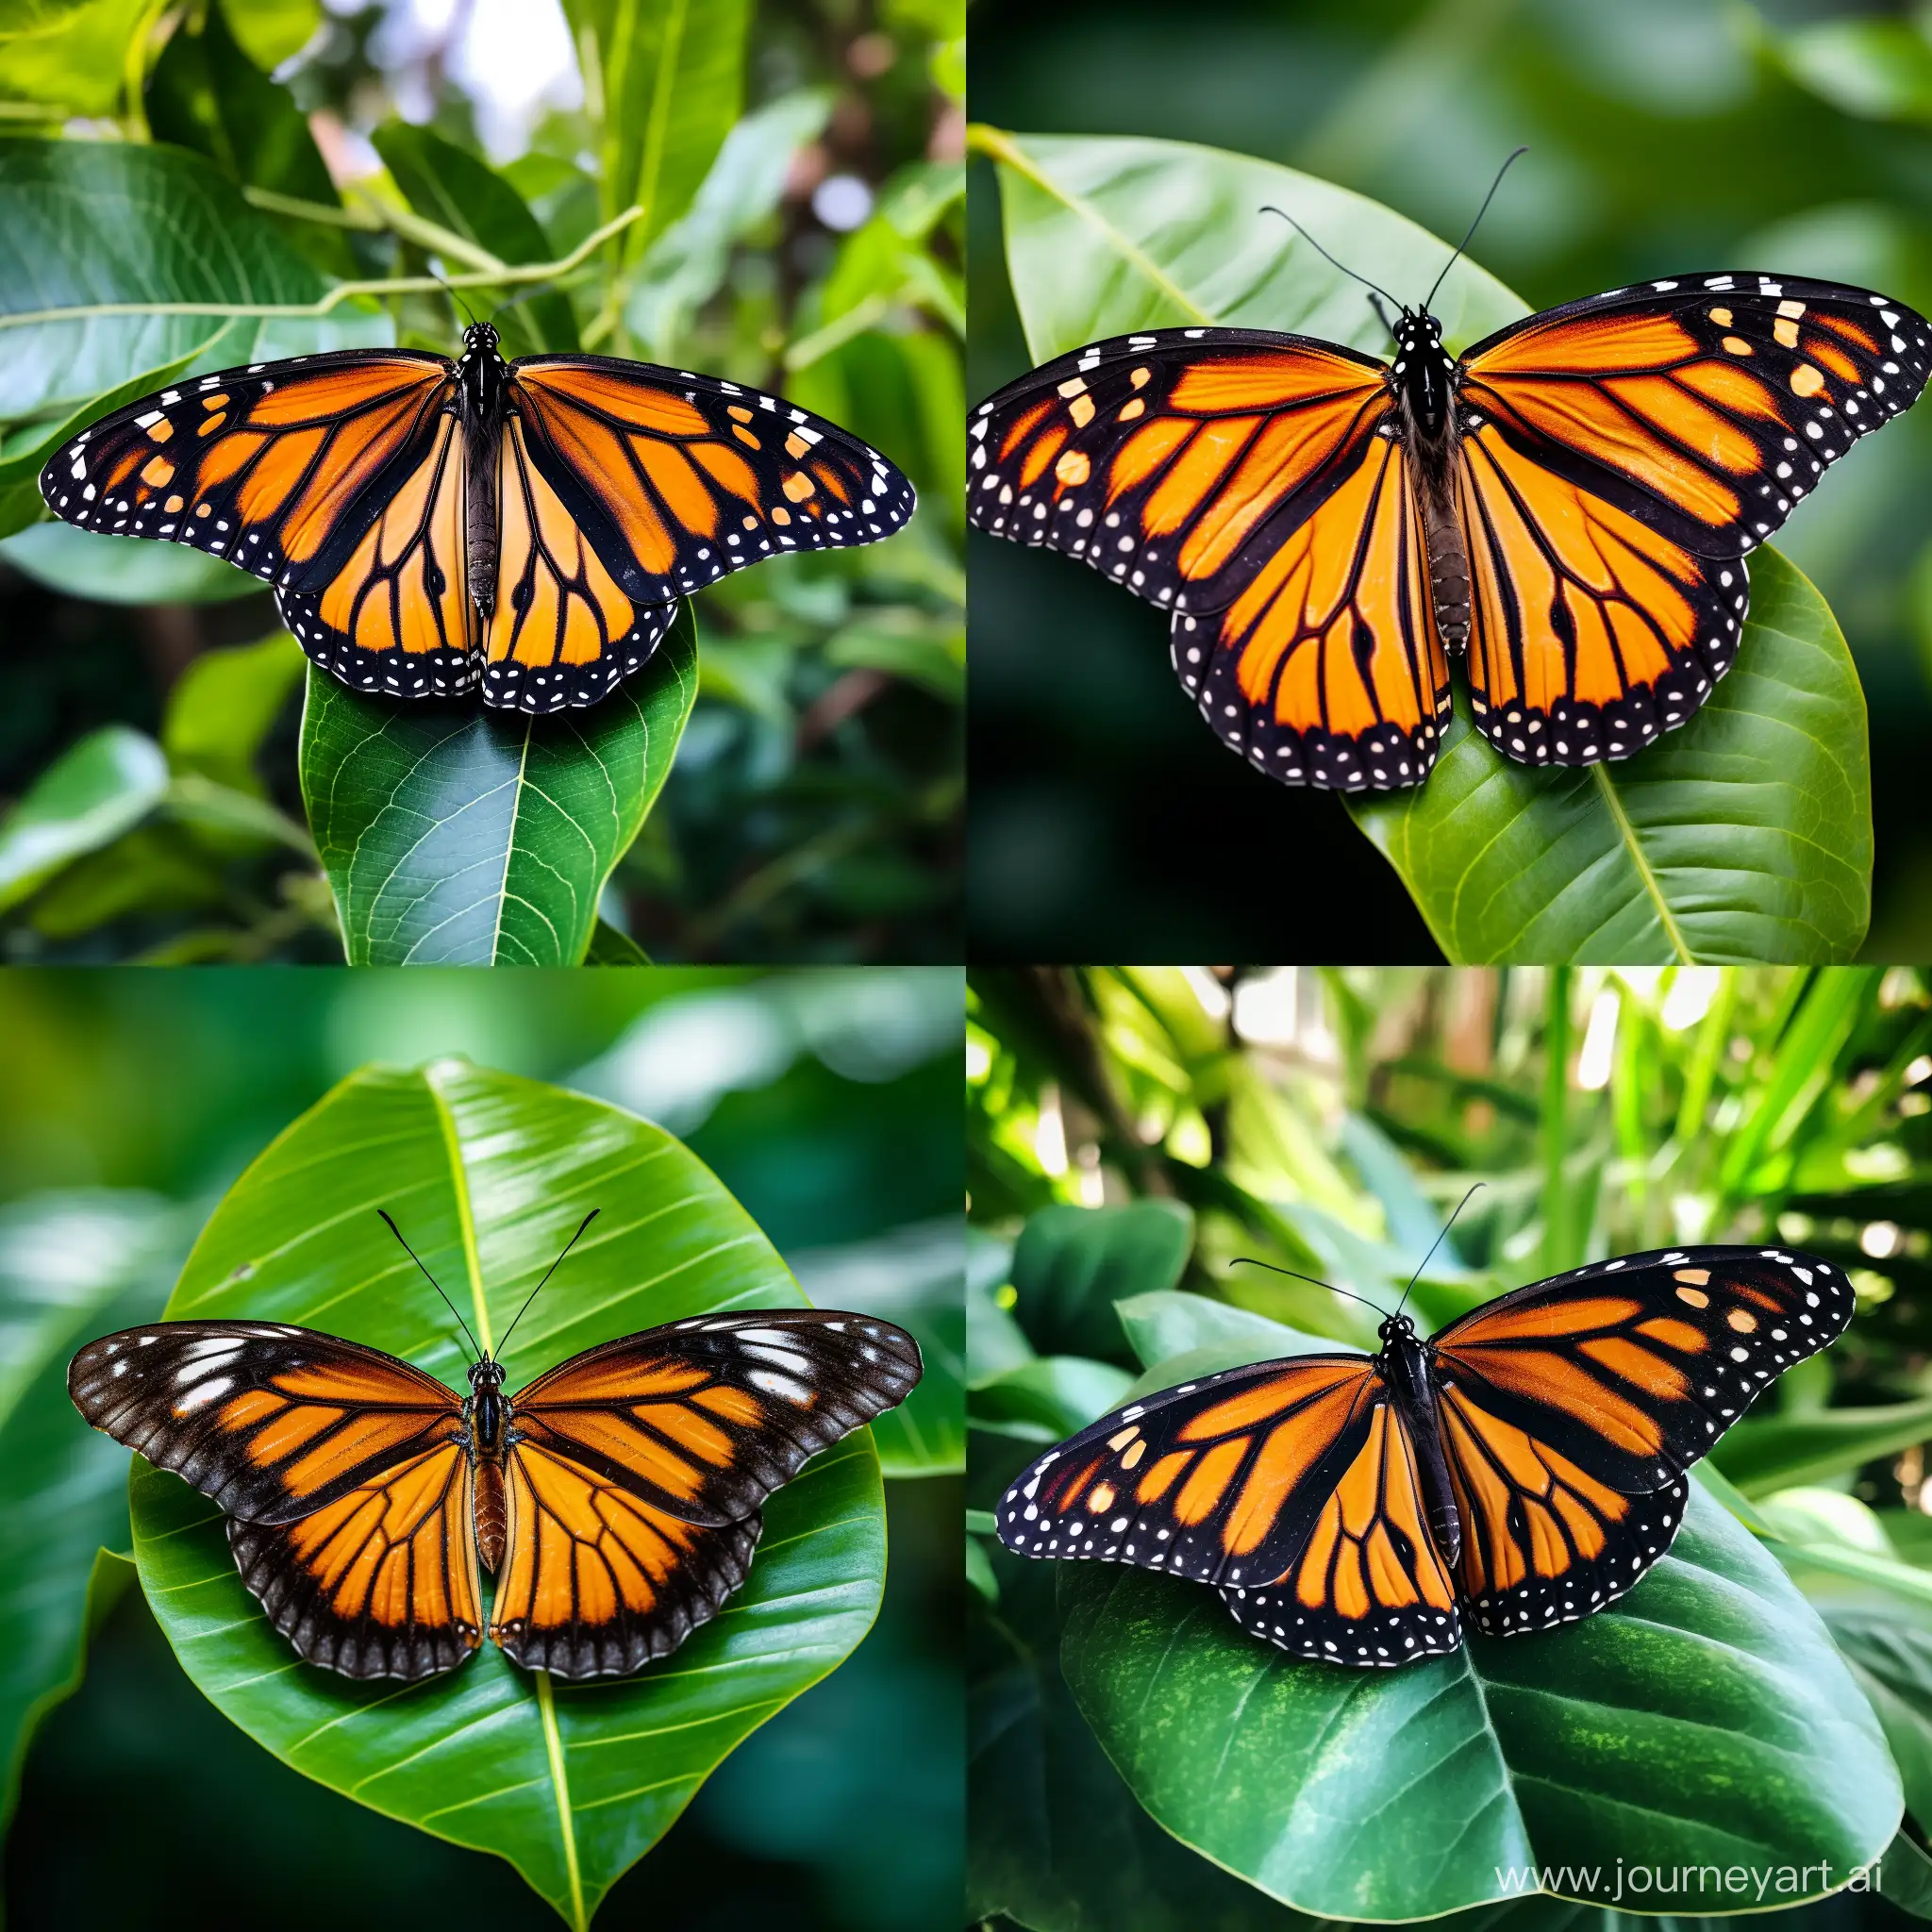 A Monarch butterfly perched on a green leaf. The butterfly's wings are closed in this image.